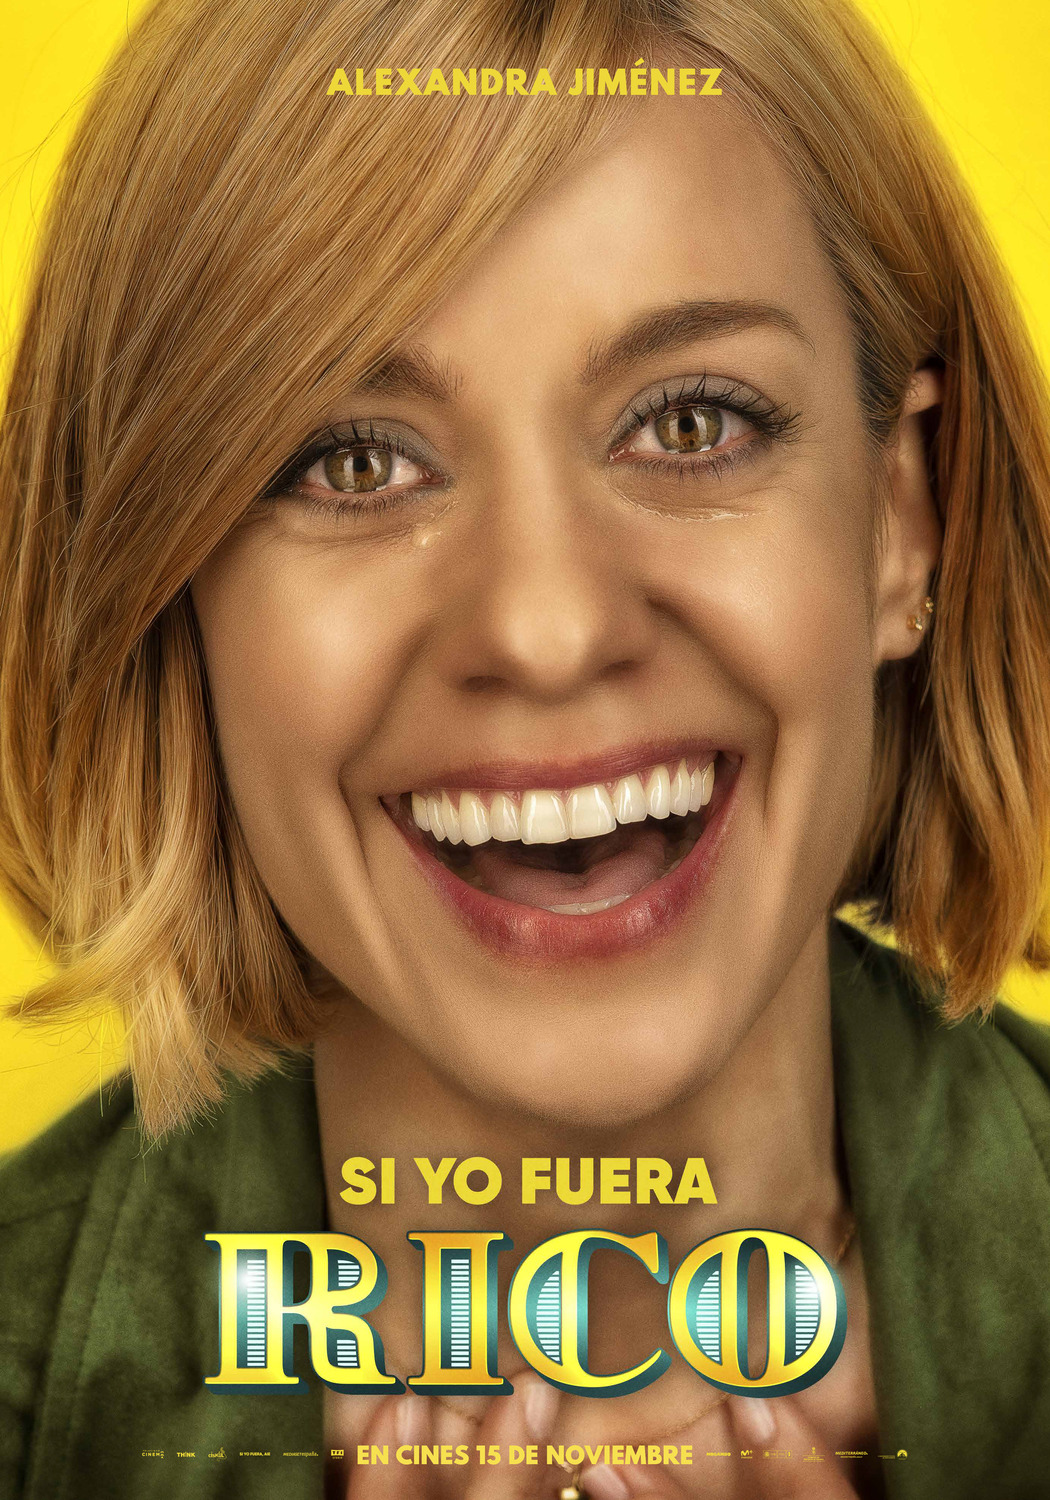 Extra Large Movie Poster Image for Si yo fuera rico (#4 of 9)